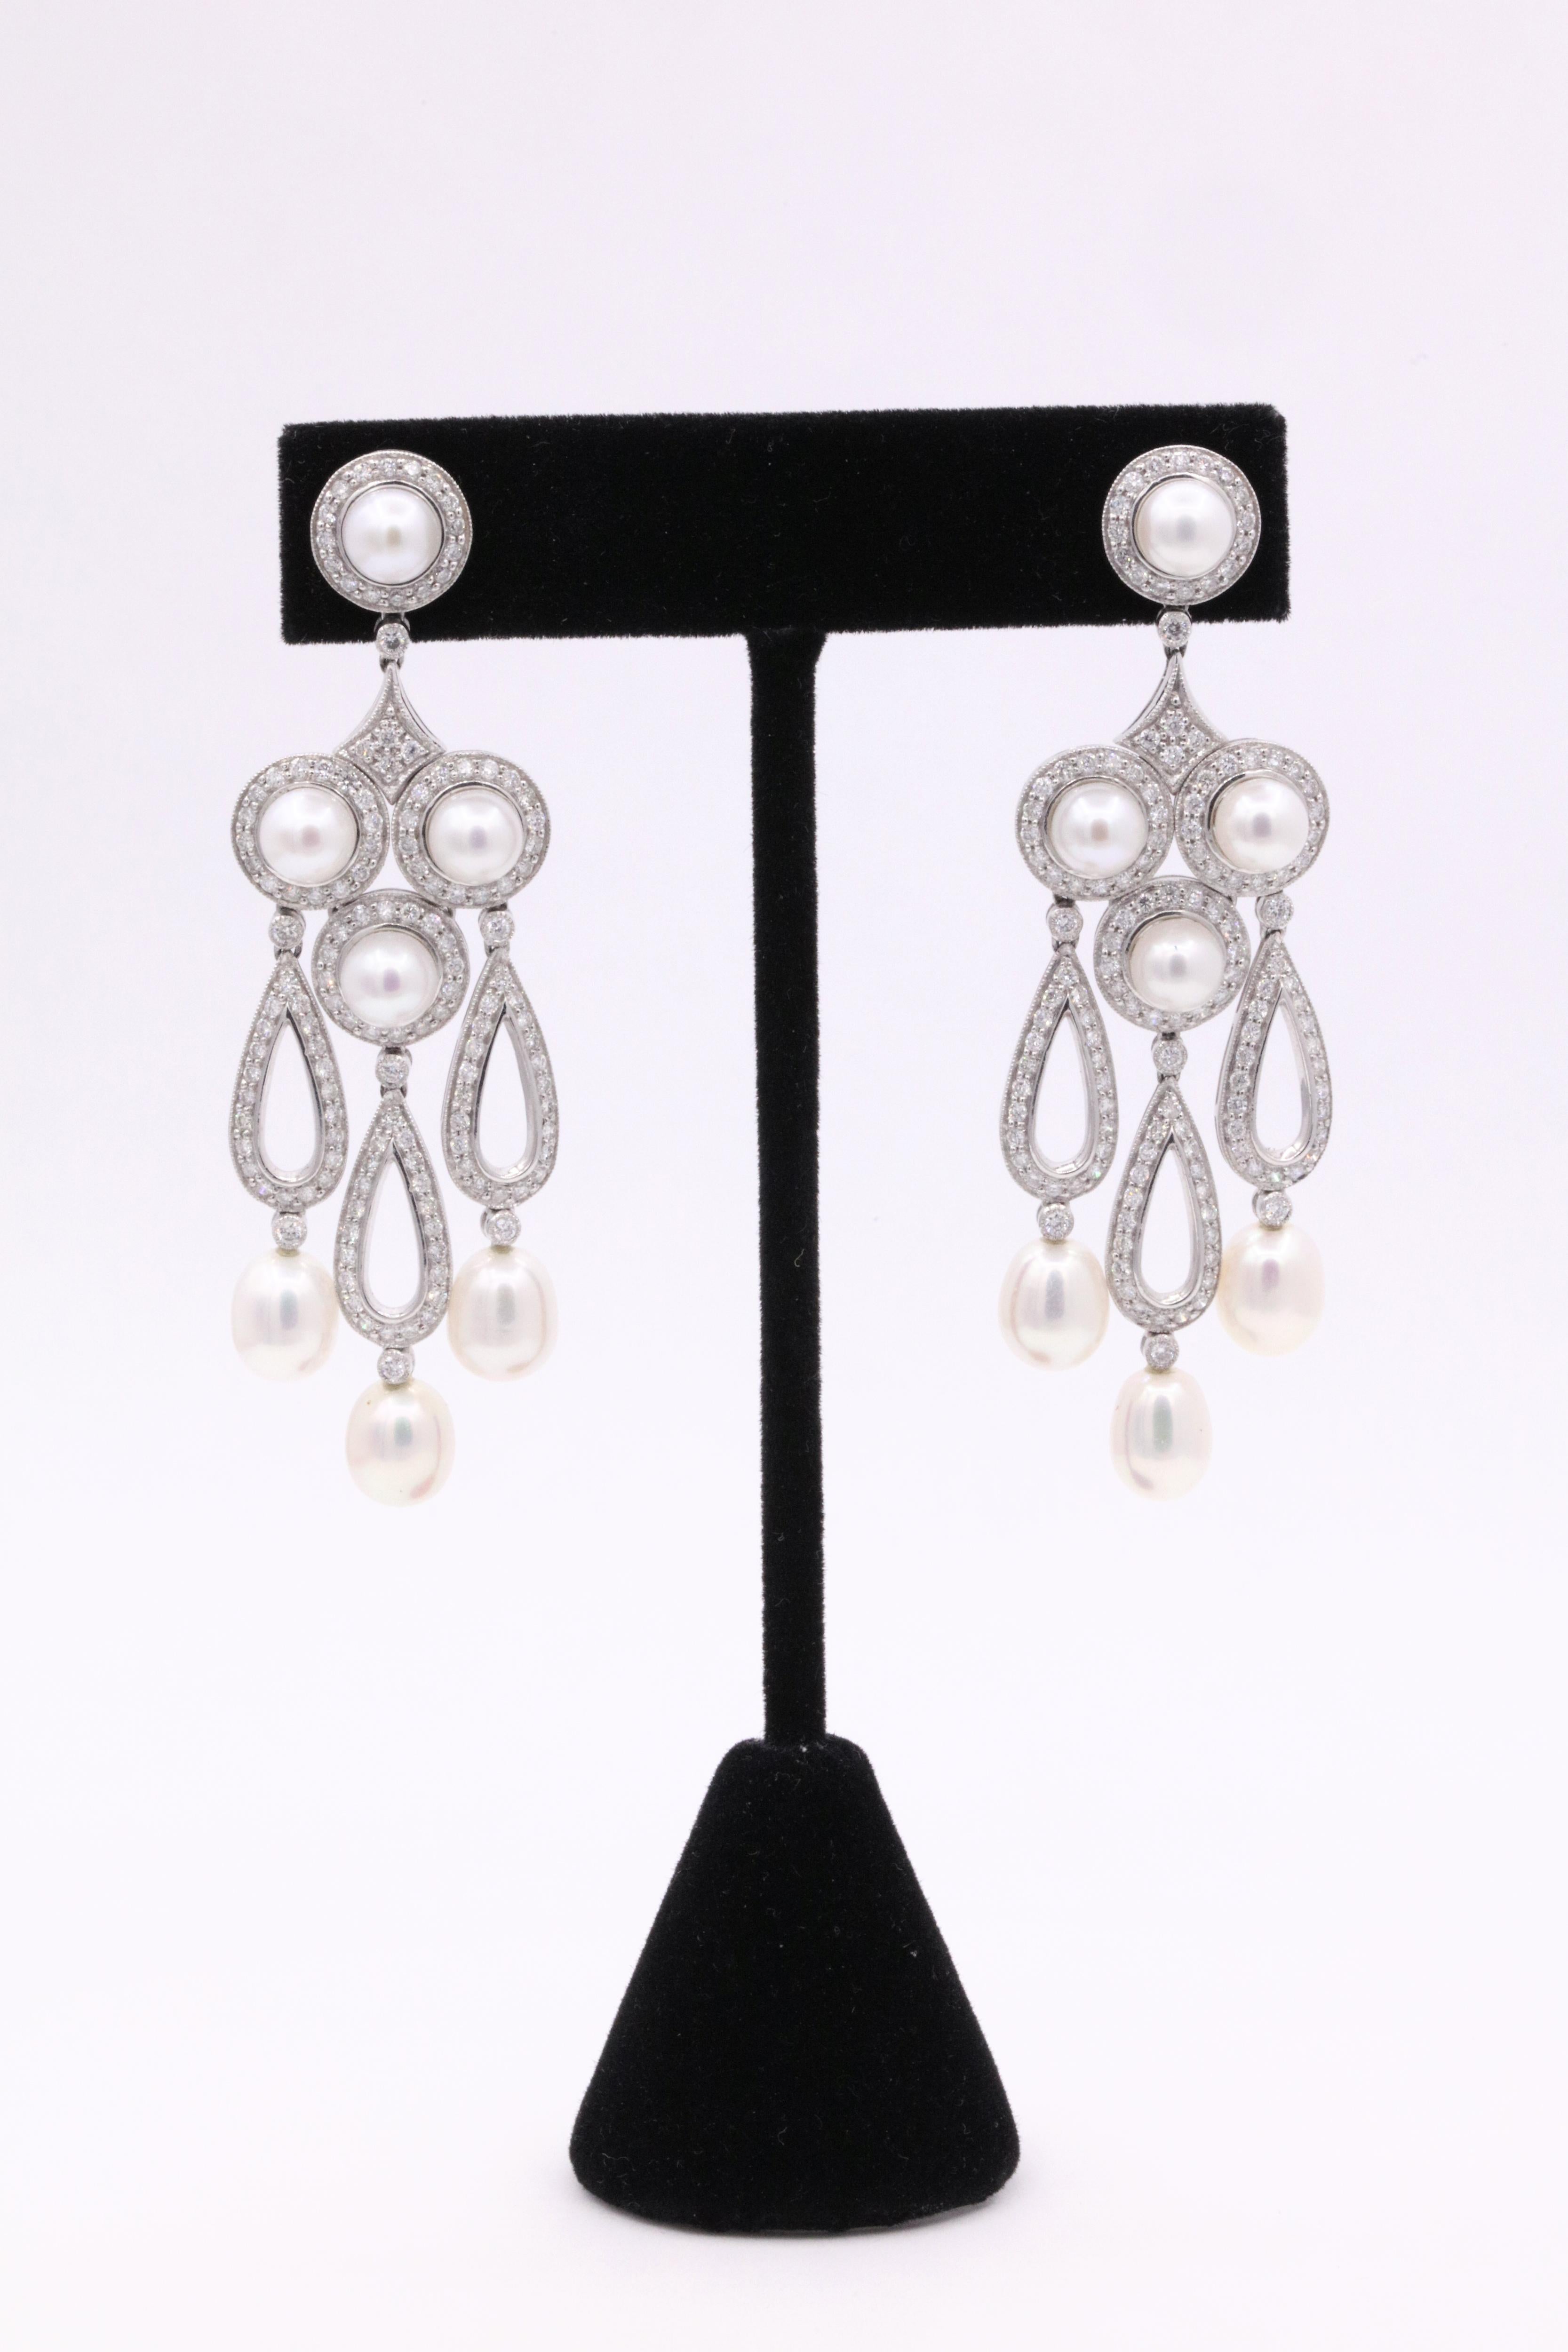 Art Deco inspired earrings featuring round brilliants weighing 3.13 carats with touches of round and oval shape pearls. 
Color G
Clarity SI
A real show stopper!